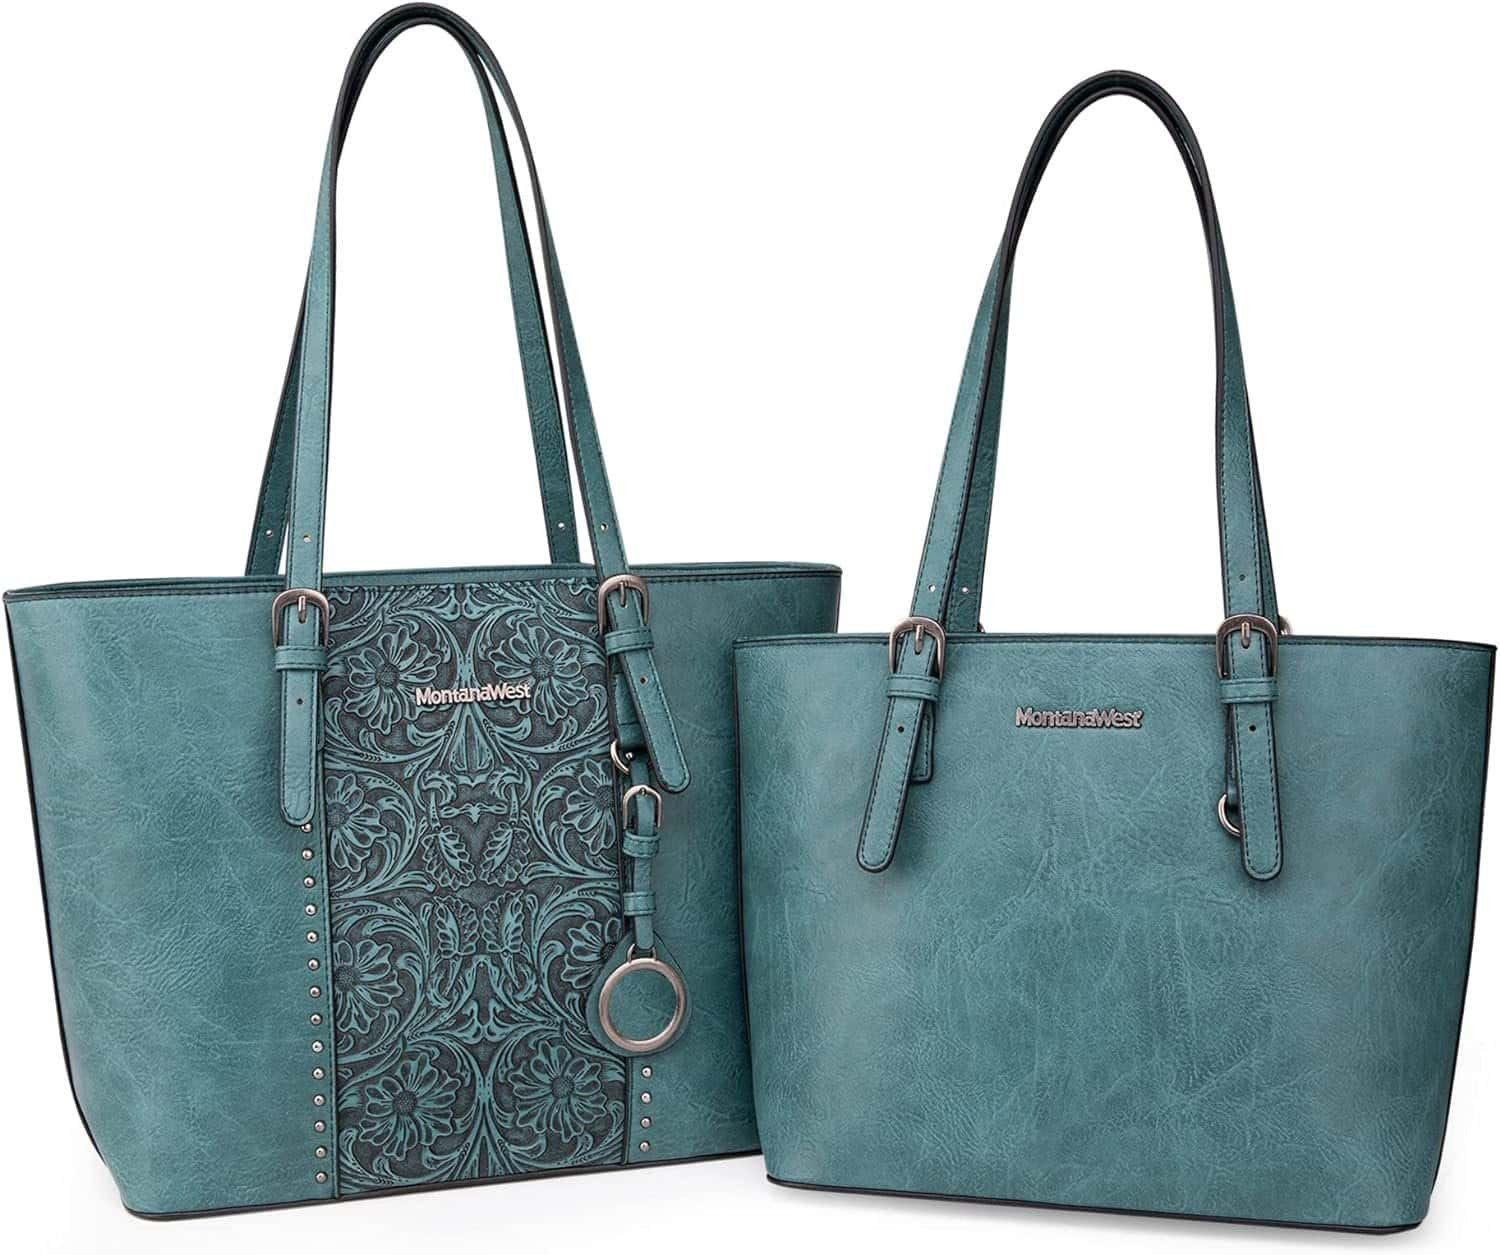 Montana West Tote Bag for Women Large Purse and Handbags Set Embossed Collection Purse 2Pcs Set